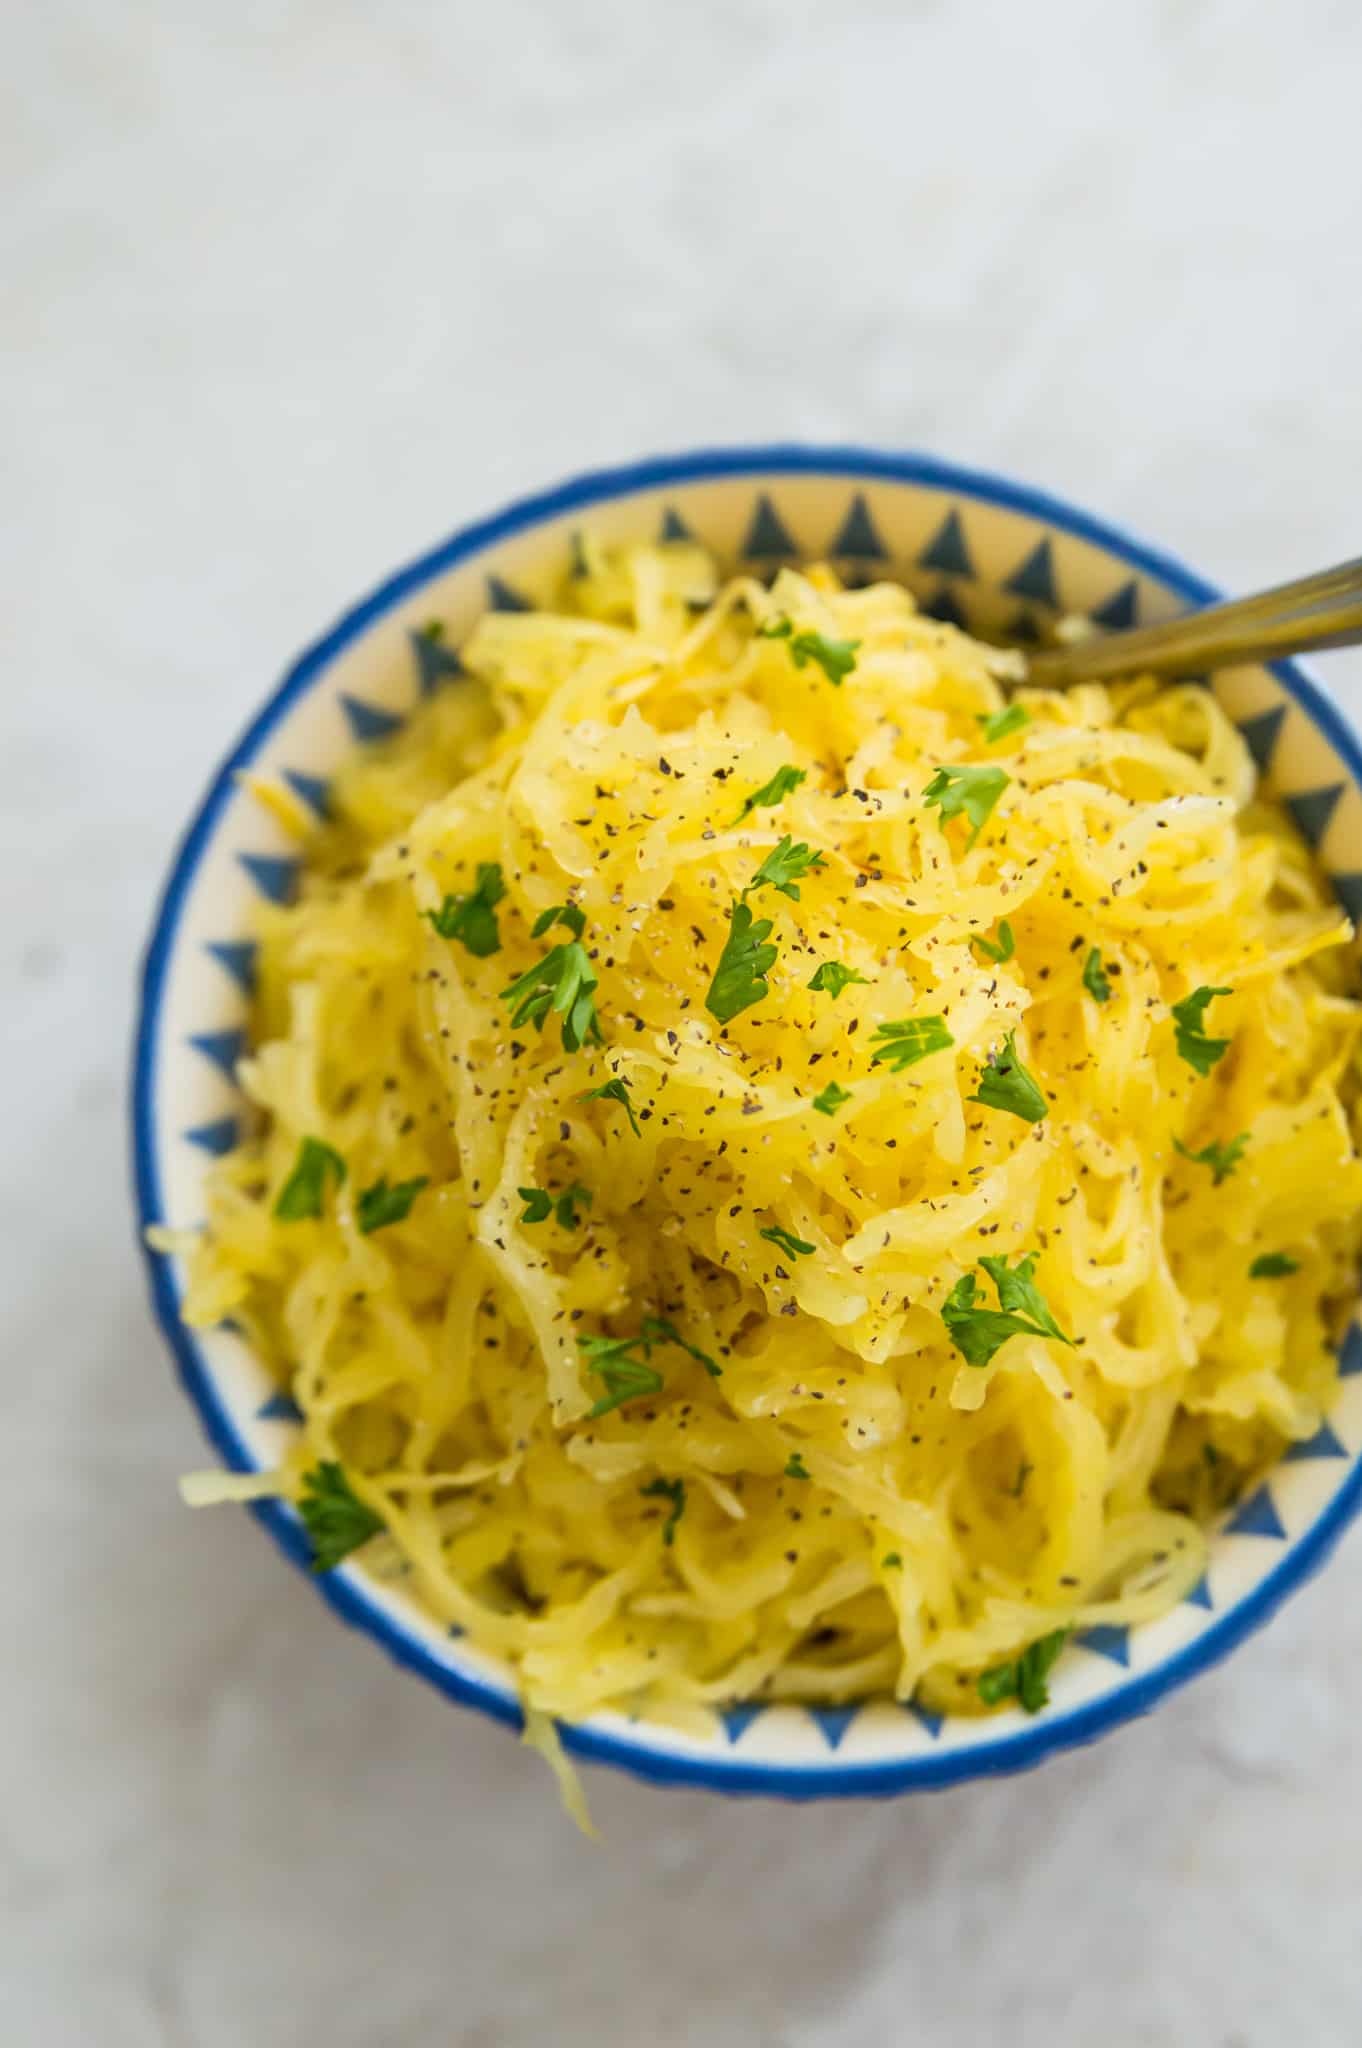 A bowl of cooked spaghetti squash with parsley on top.